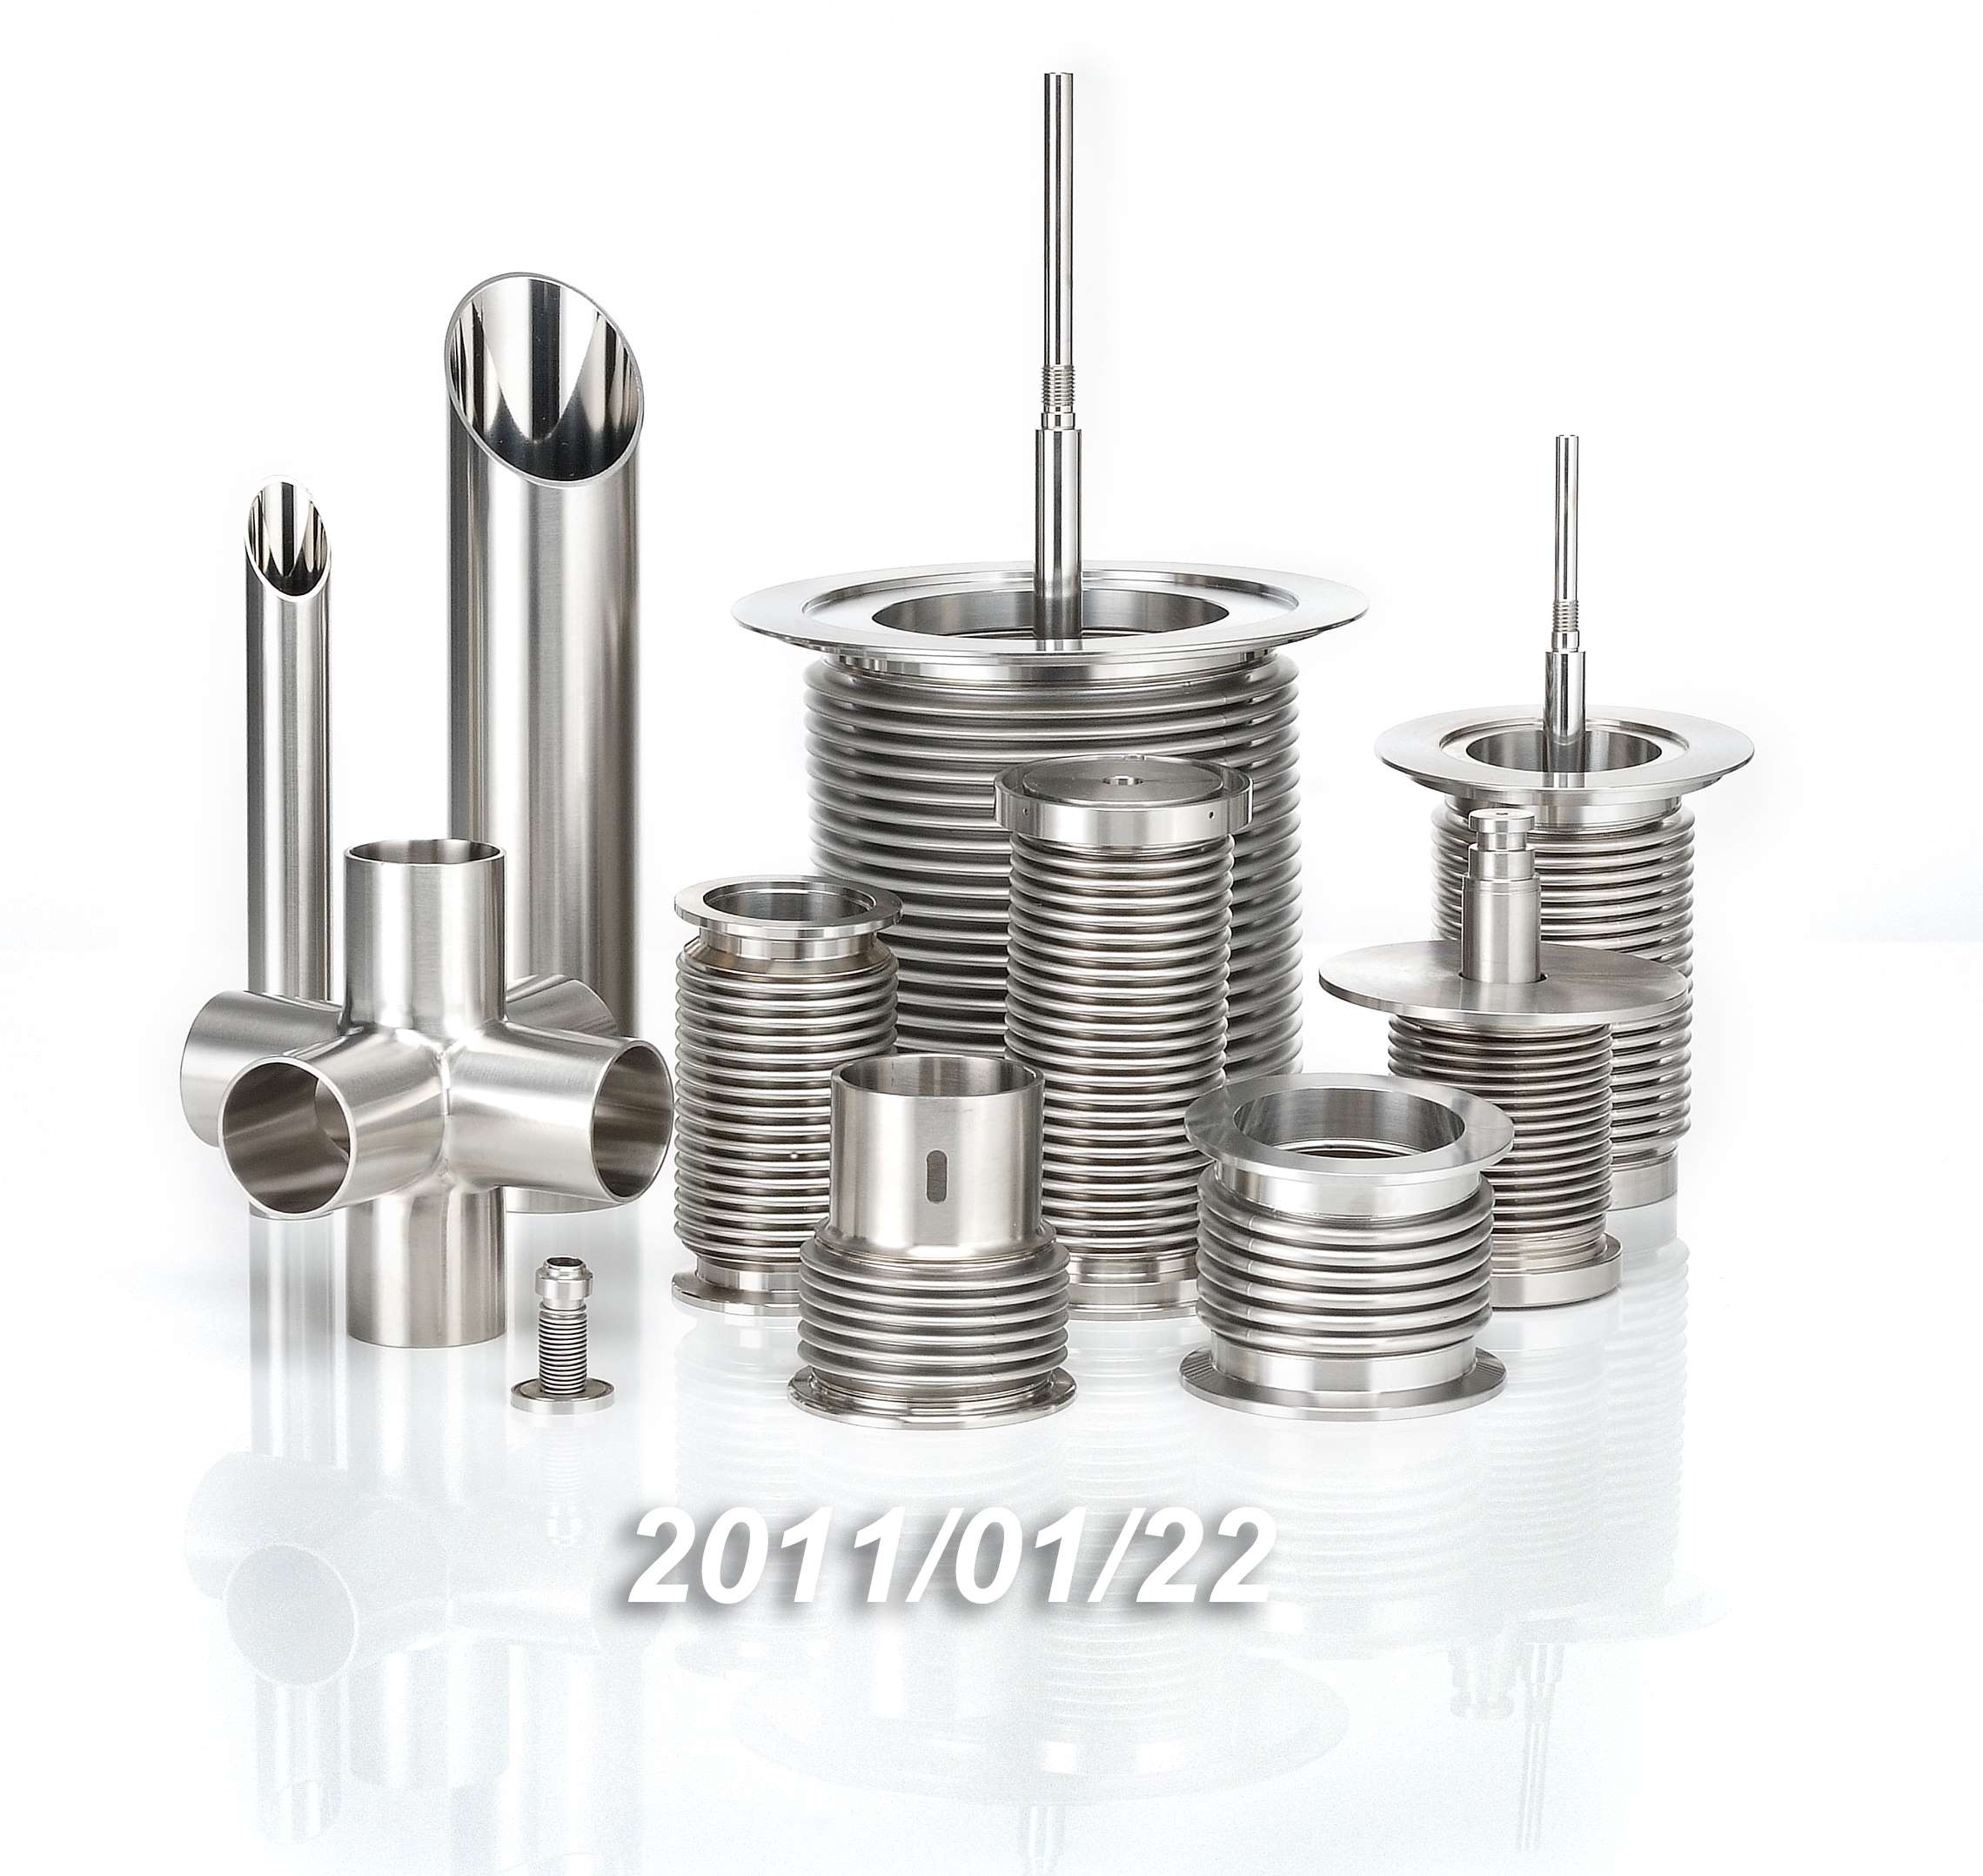 Qualified Shafts, Couplings, Keys and Clutches  Manufacturer and Supplier